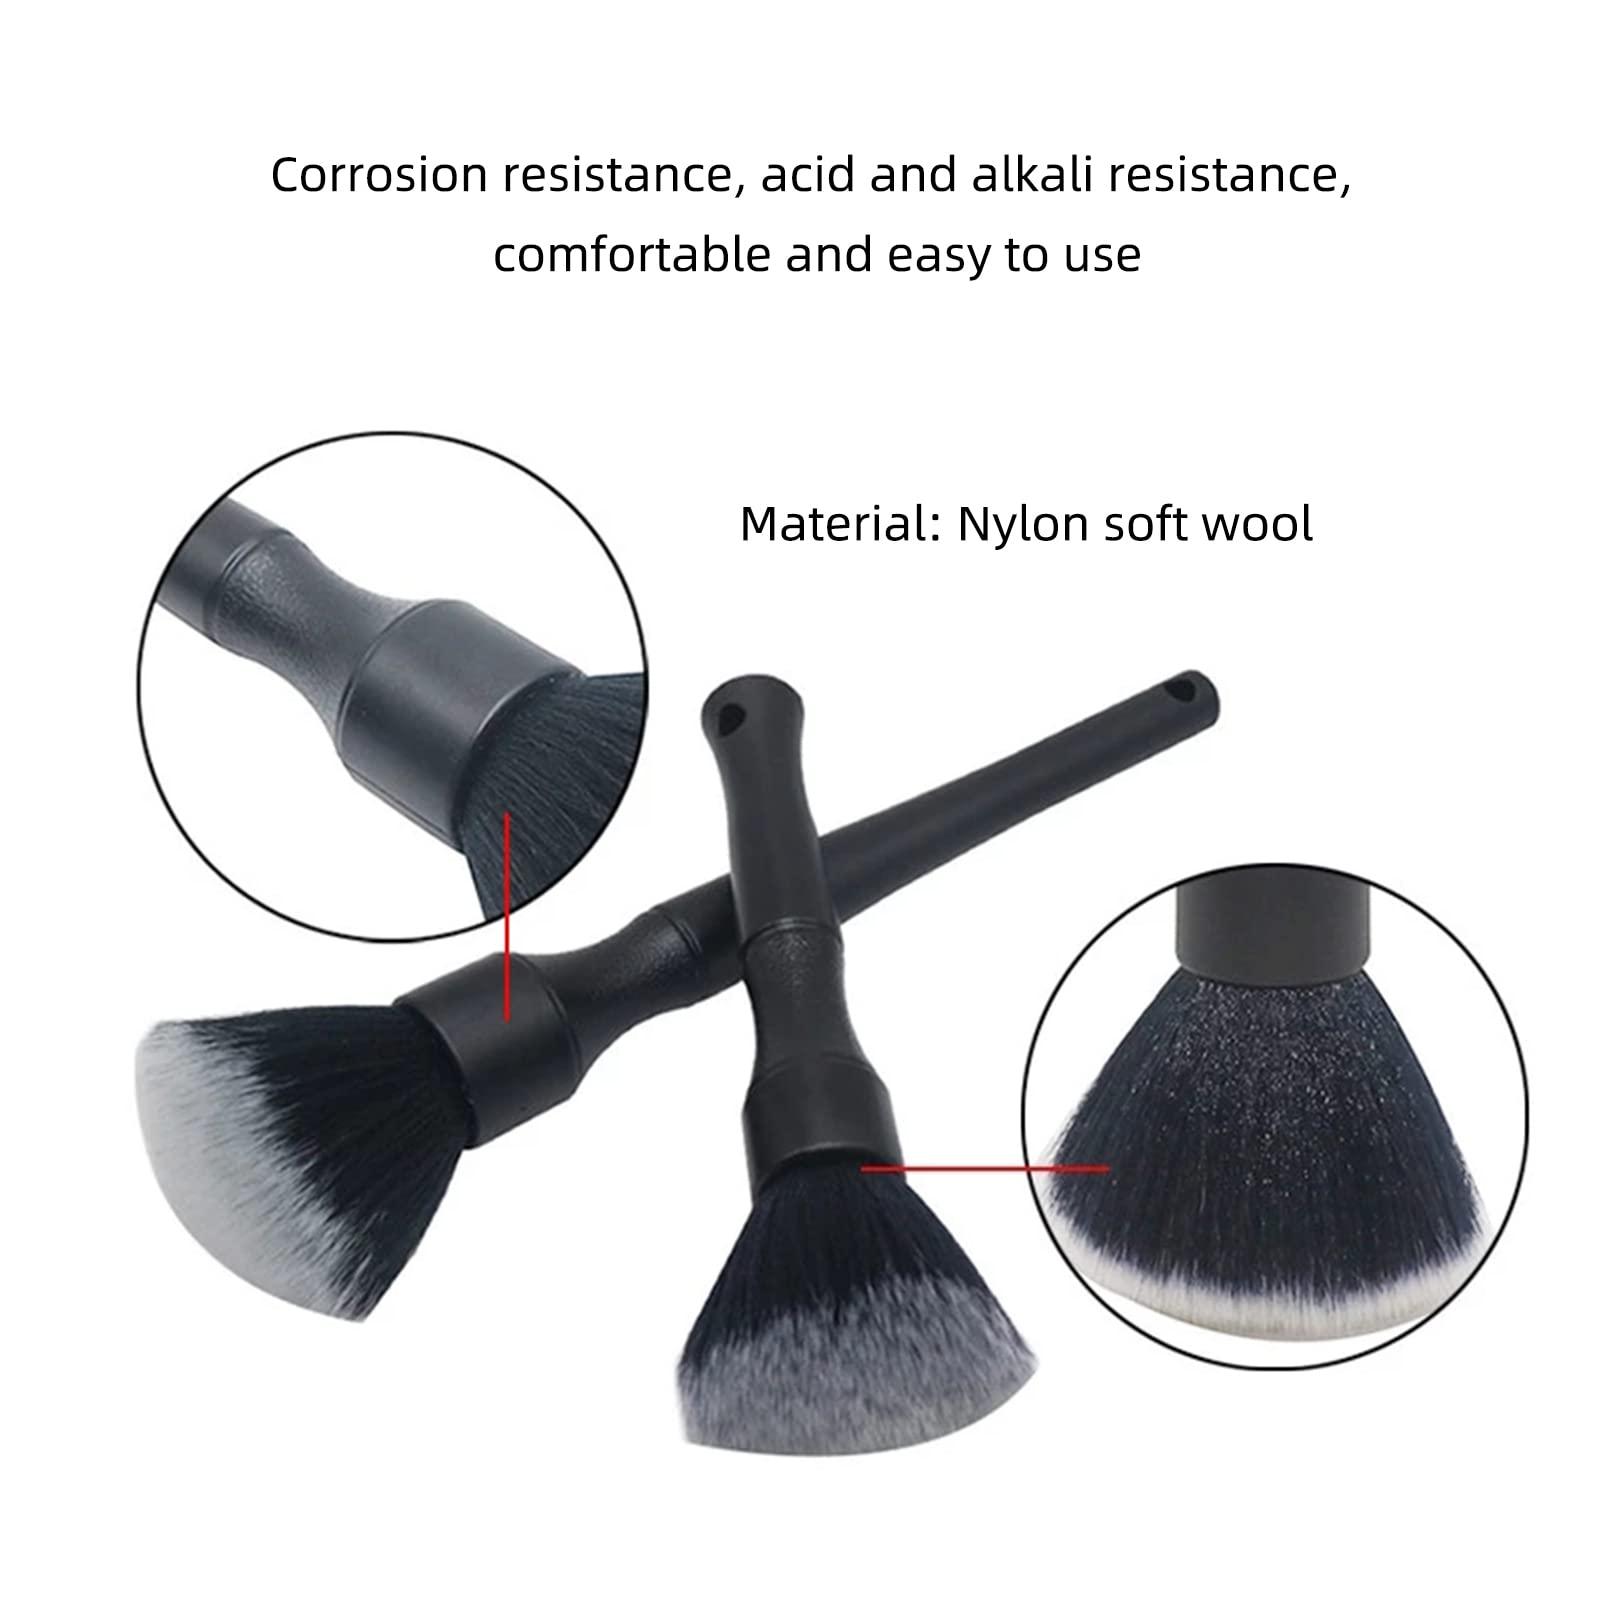 ALI2 Detailing Brush Set,Soft Comfortable Grip for Car Interior and Exterior Detailing Cleaning,Black 9